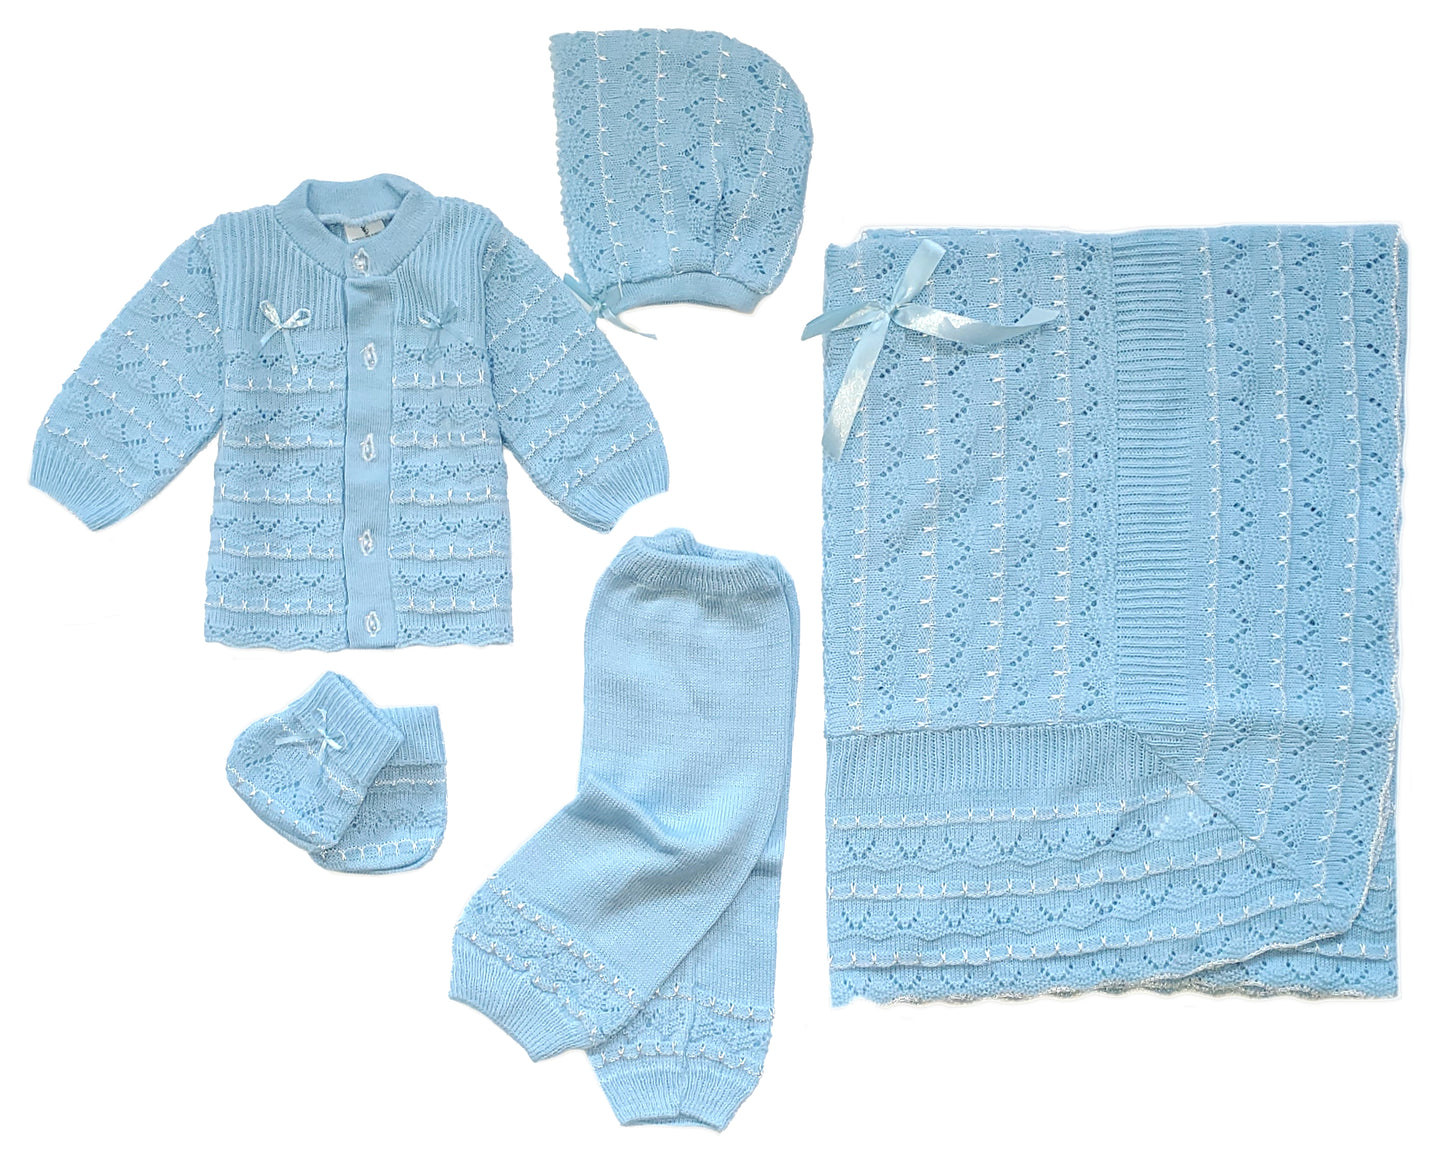 Wholesale Crystal Crochet 5 Piece Outfit Set With Blanket